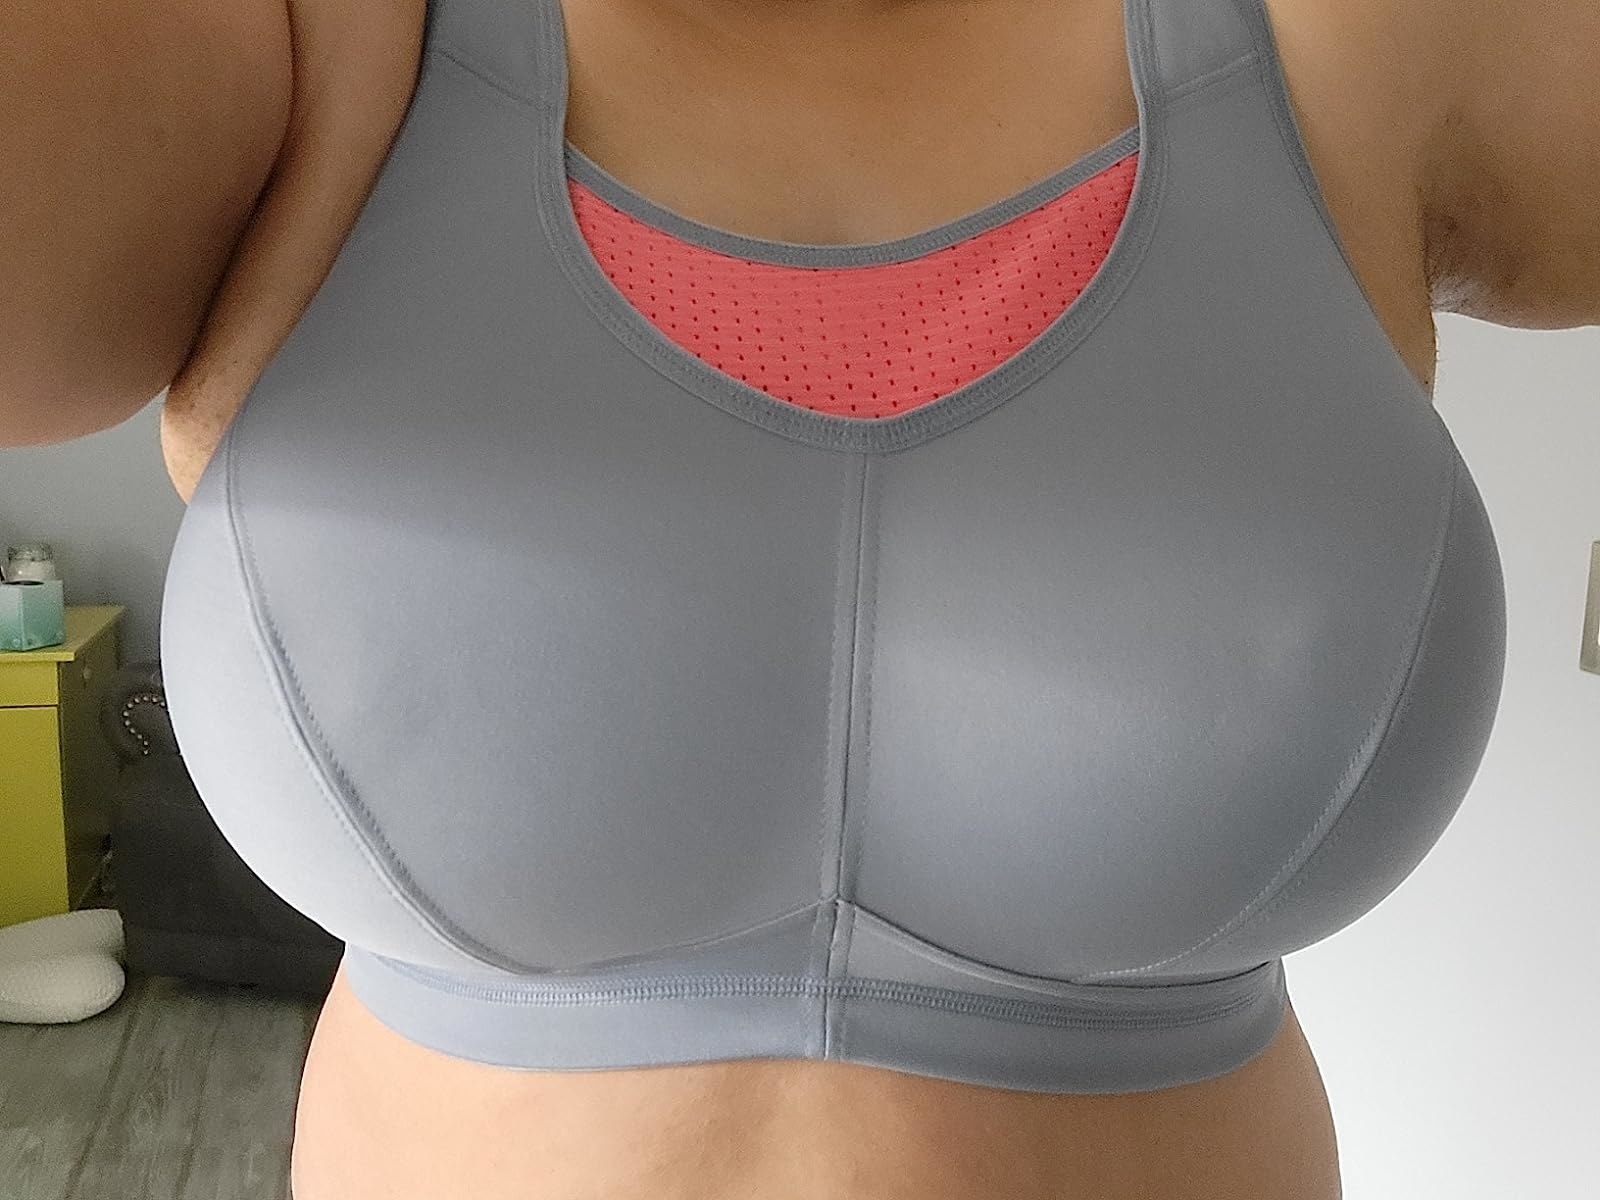 A reviewer in a grey and orange bra